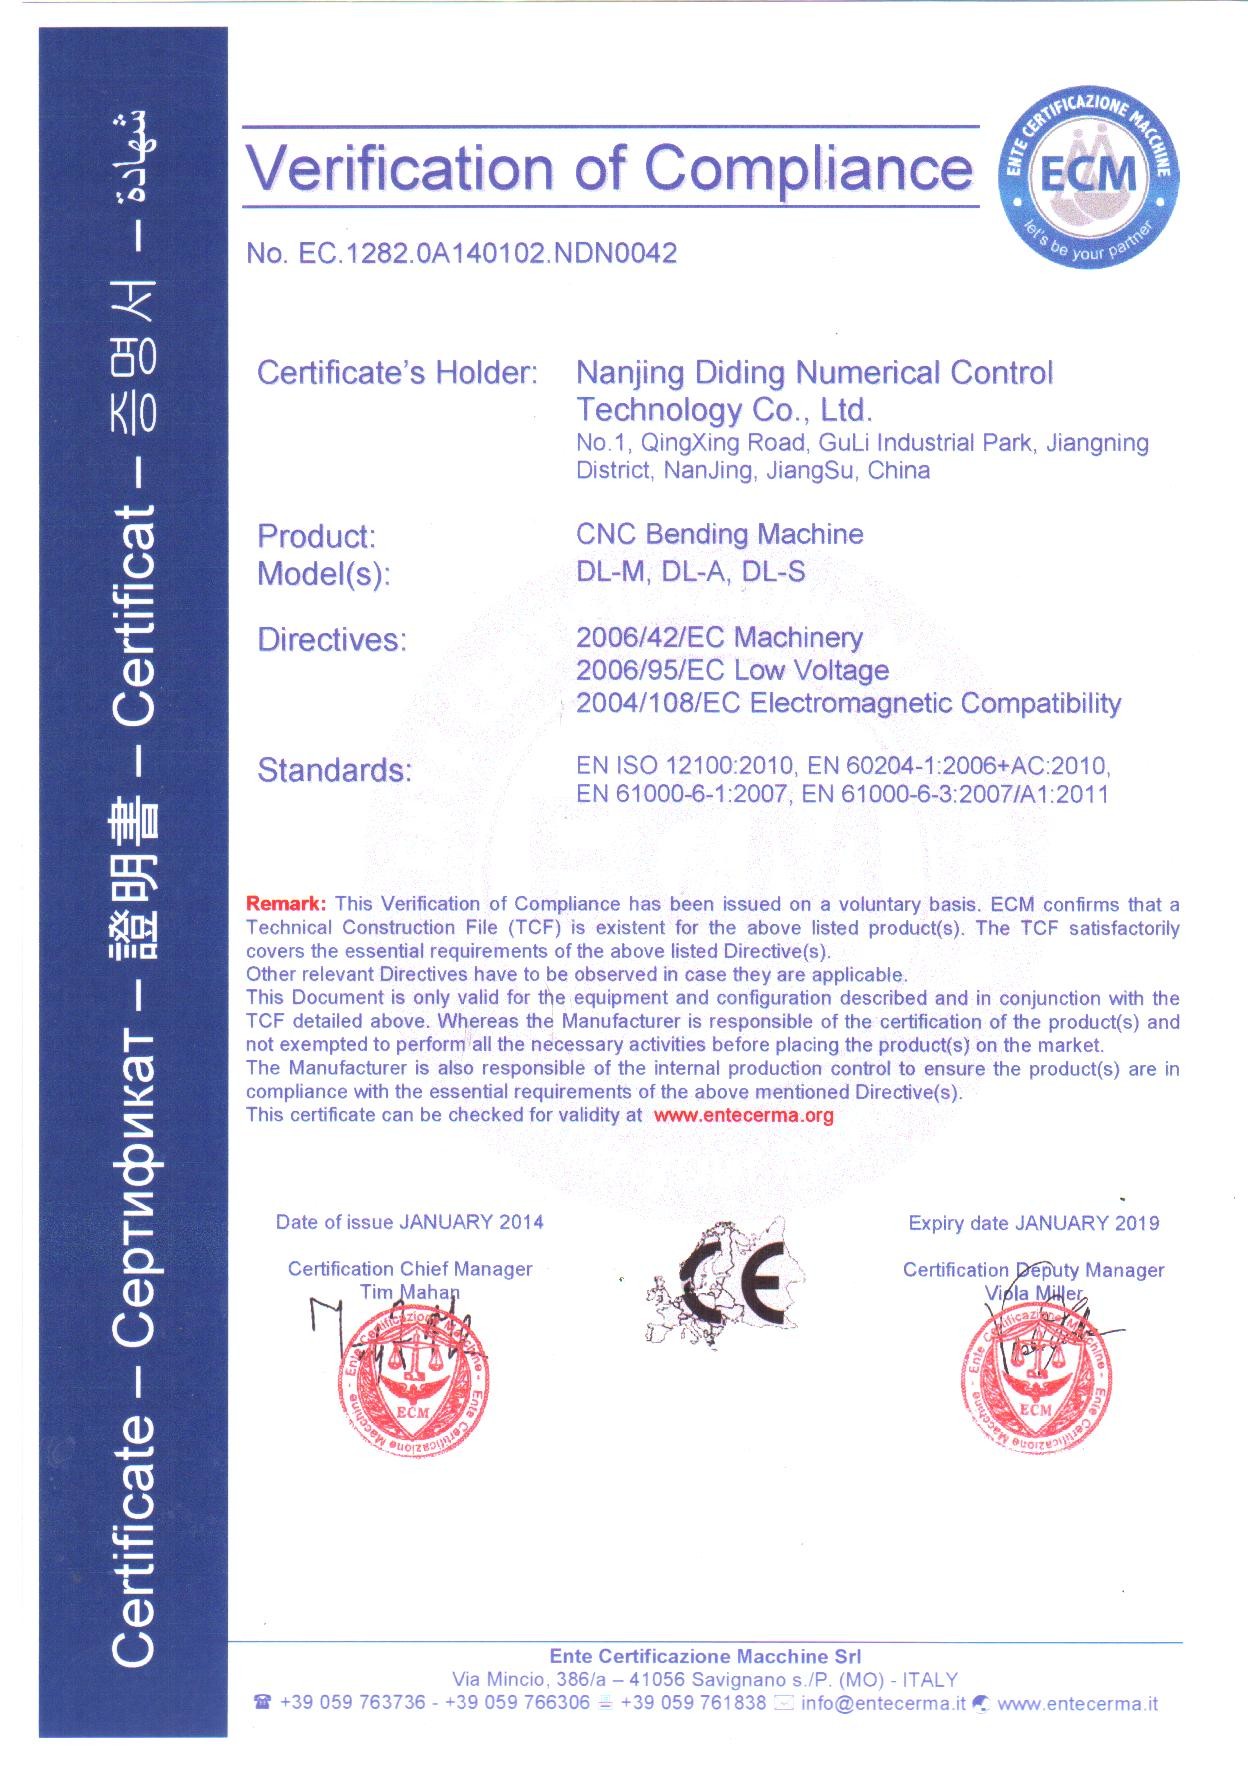 Nanjing Diding Numerical Control Technology Co., Ltd. Certifications